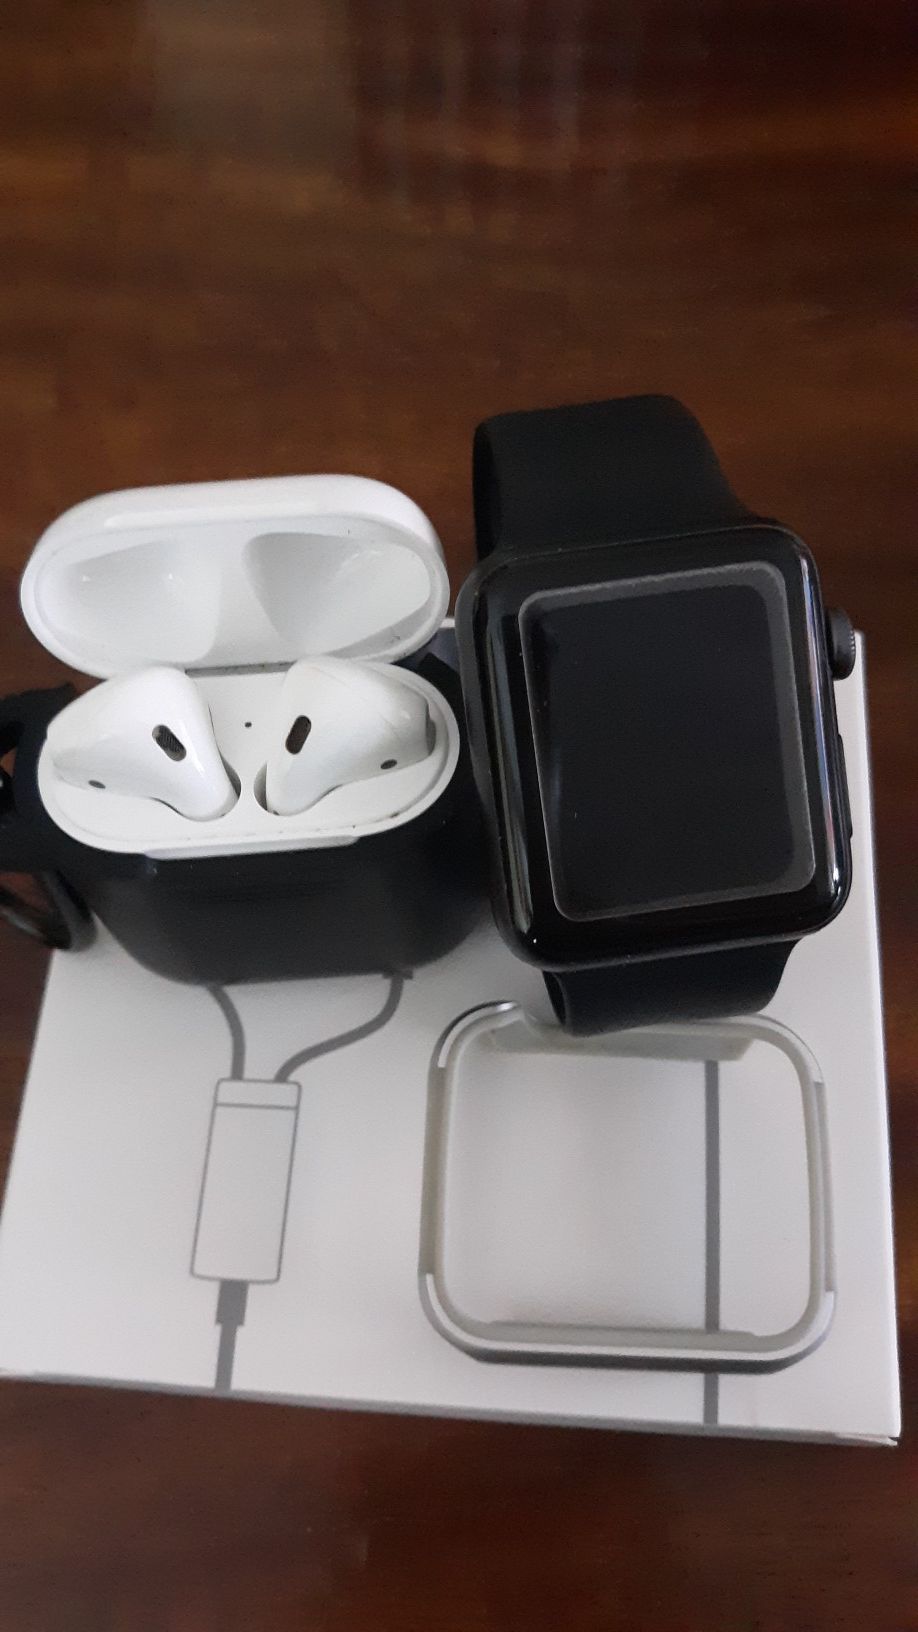 Airpad &Apple watch